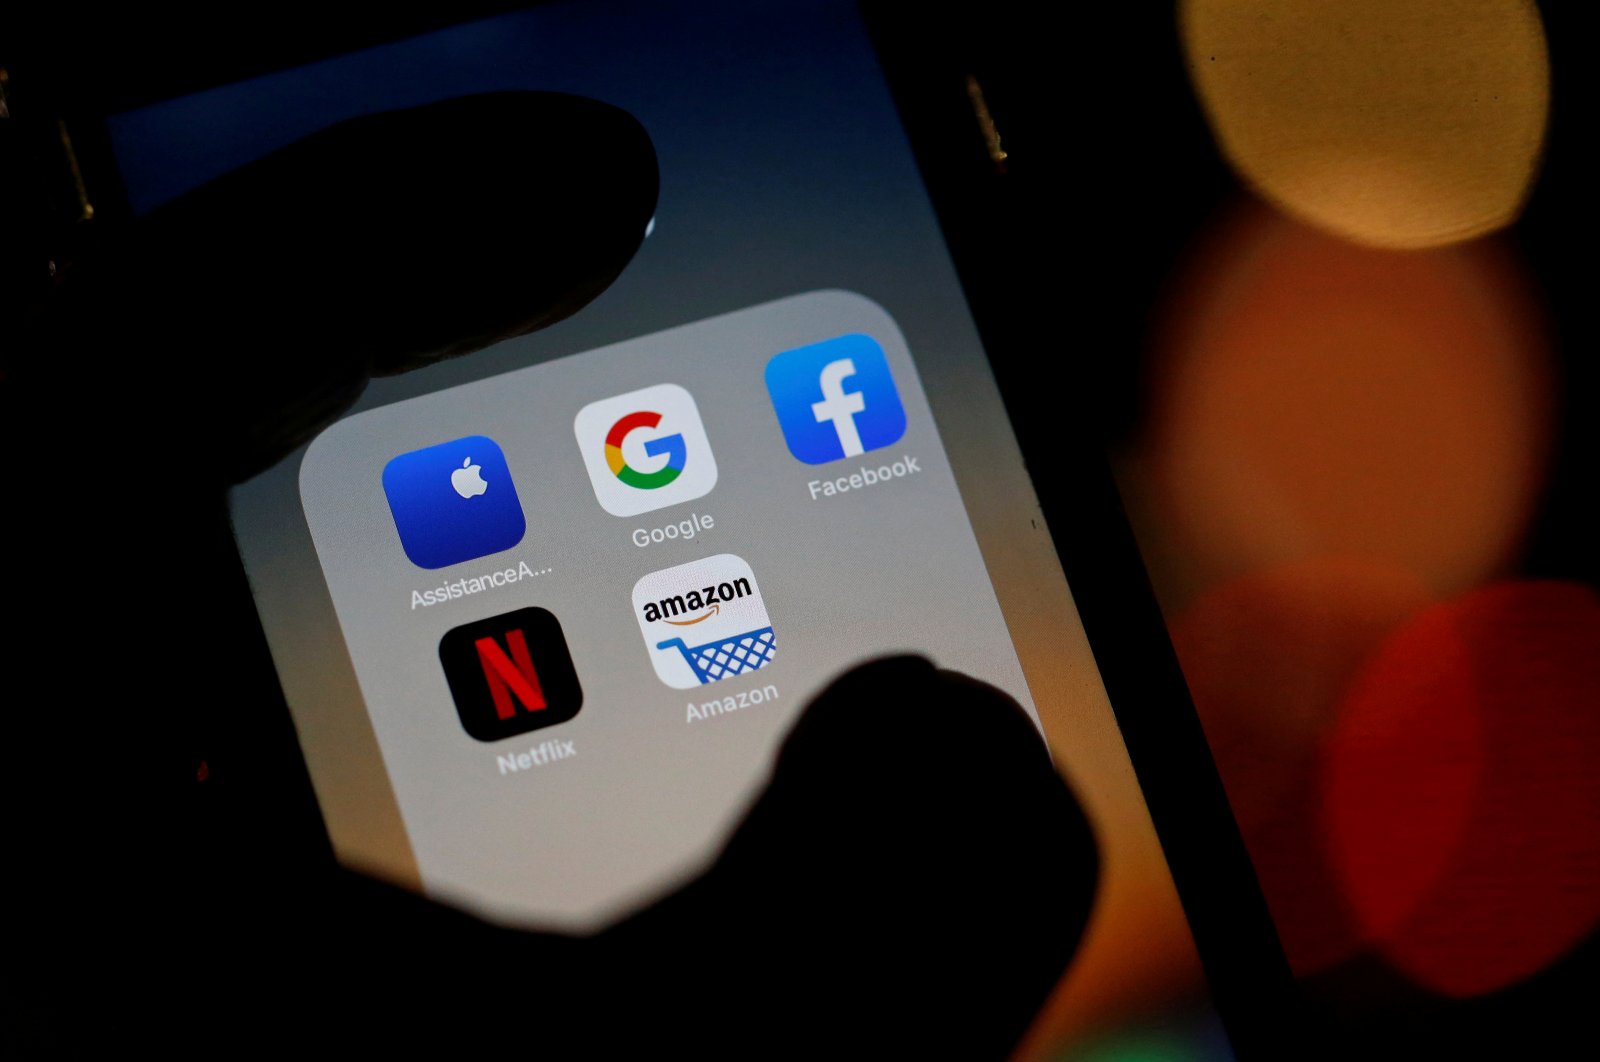 The logos of mobile apps Google, Amazon, Facebook, Apple and Netflix are displayed on a screen in this illustration picture taken Dec. 3, 2019. (Reuters Photo)